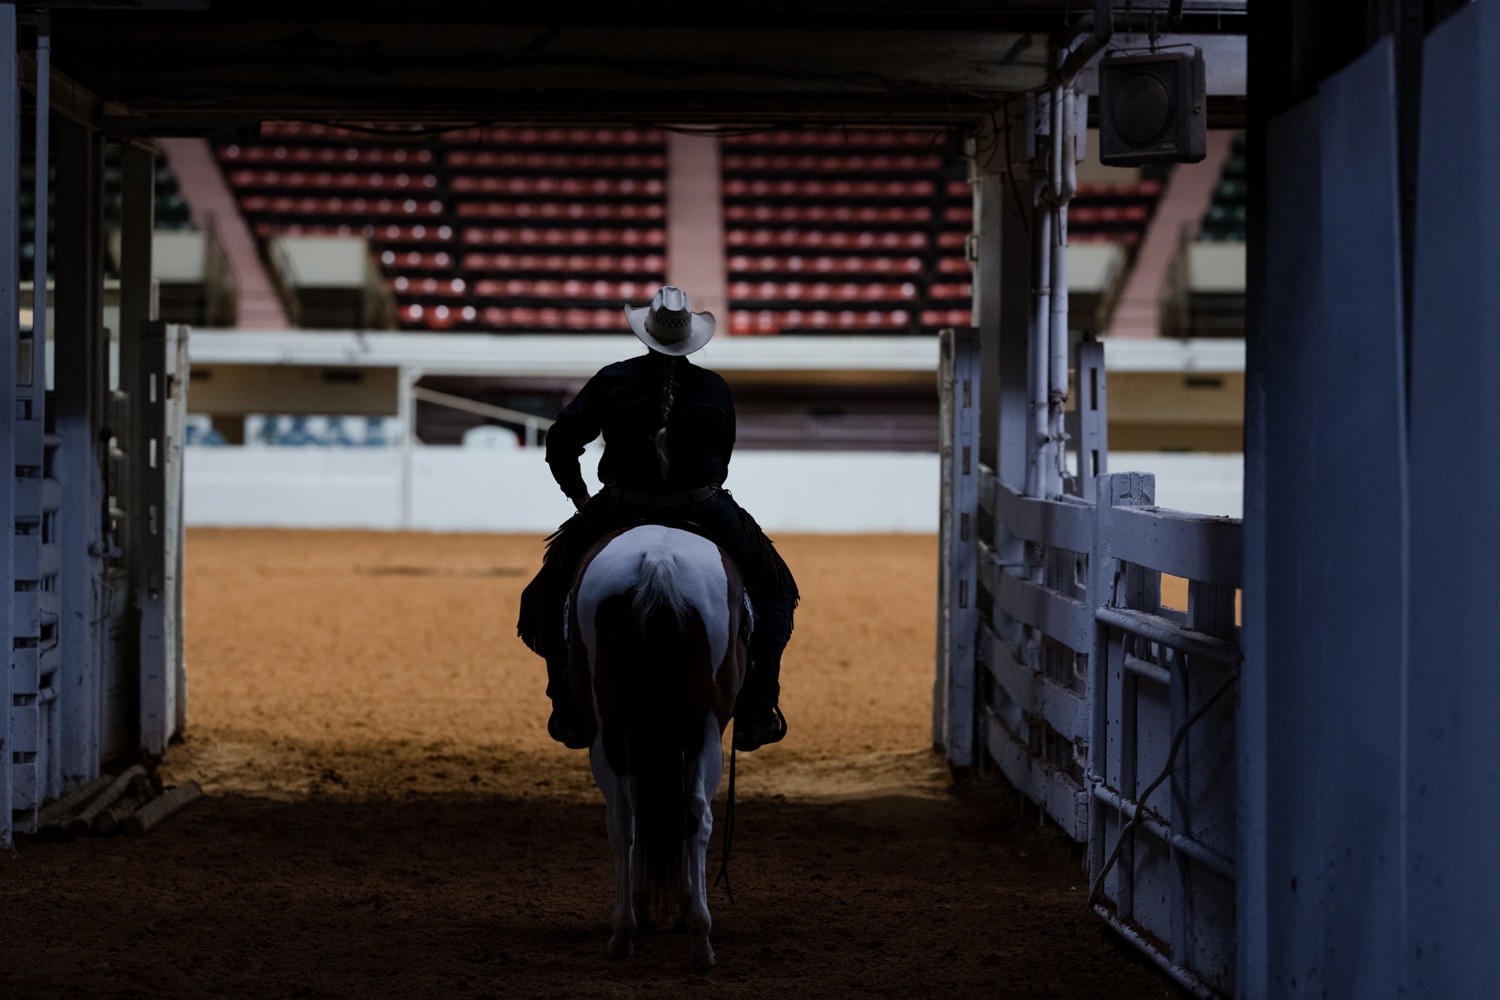 2021 APHA World Show Kirstie Marie Photography